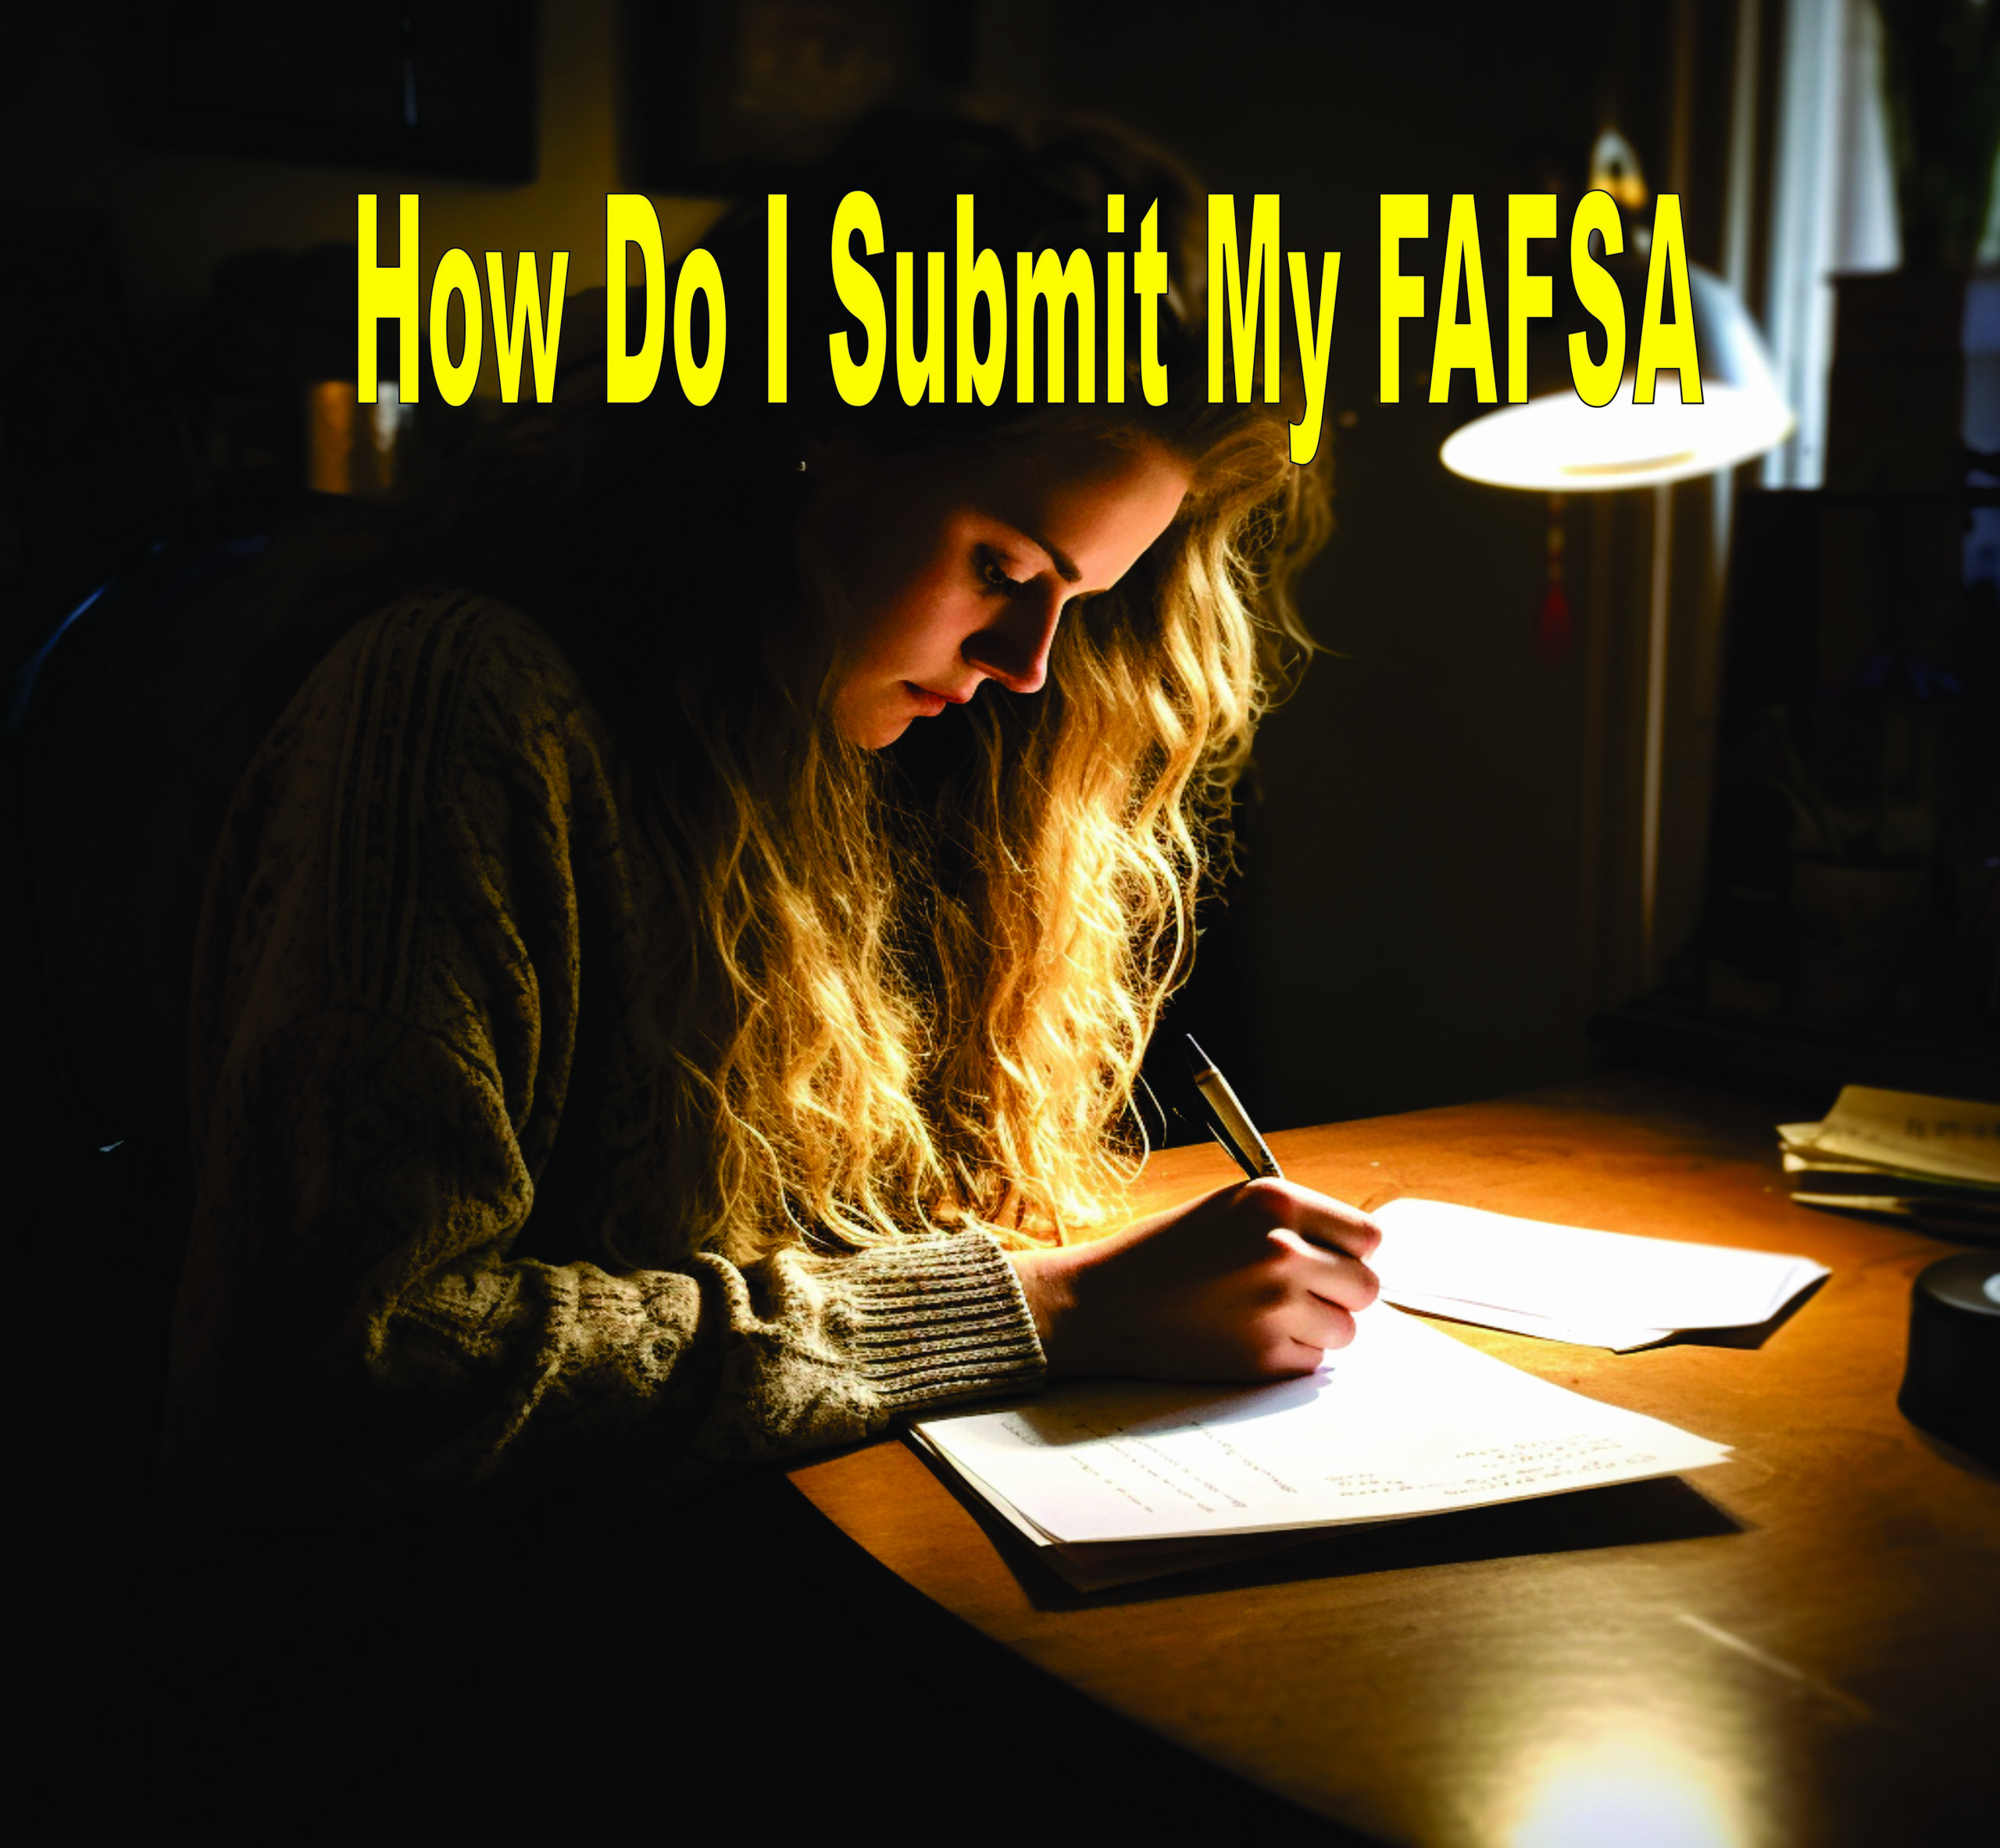 How Do I Submit My Fafsa